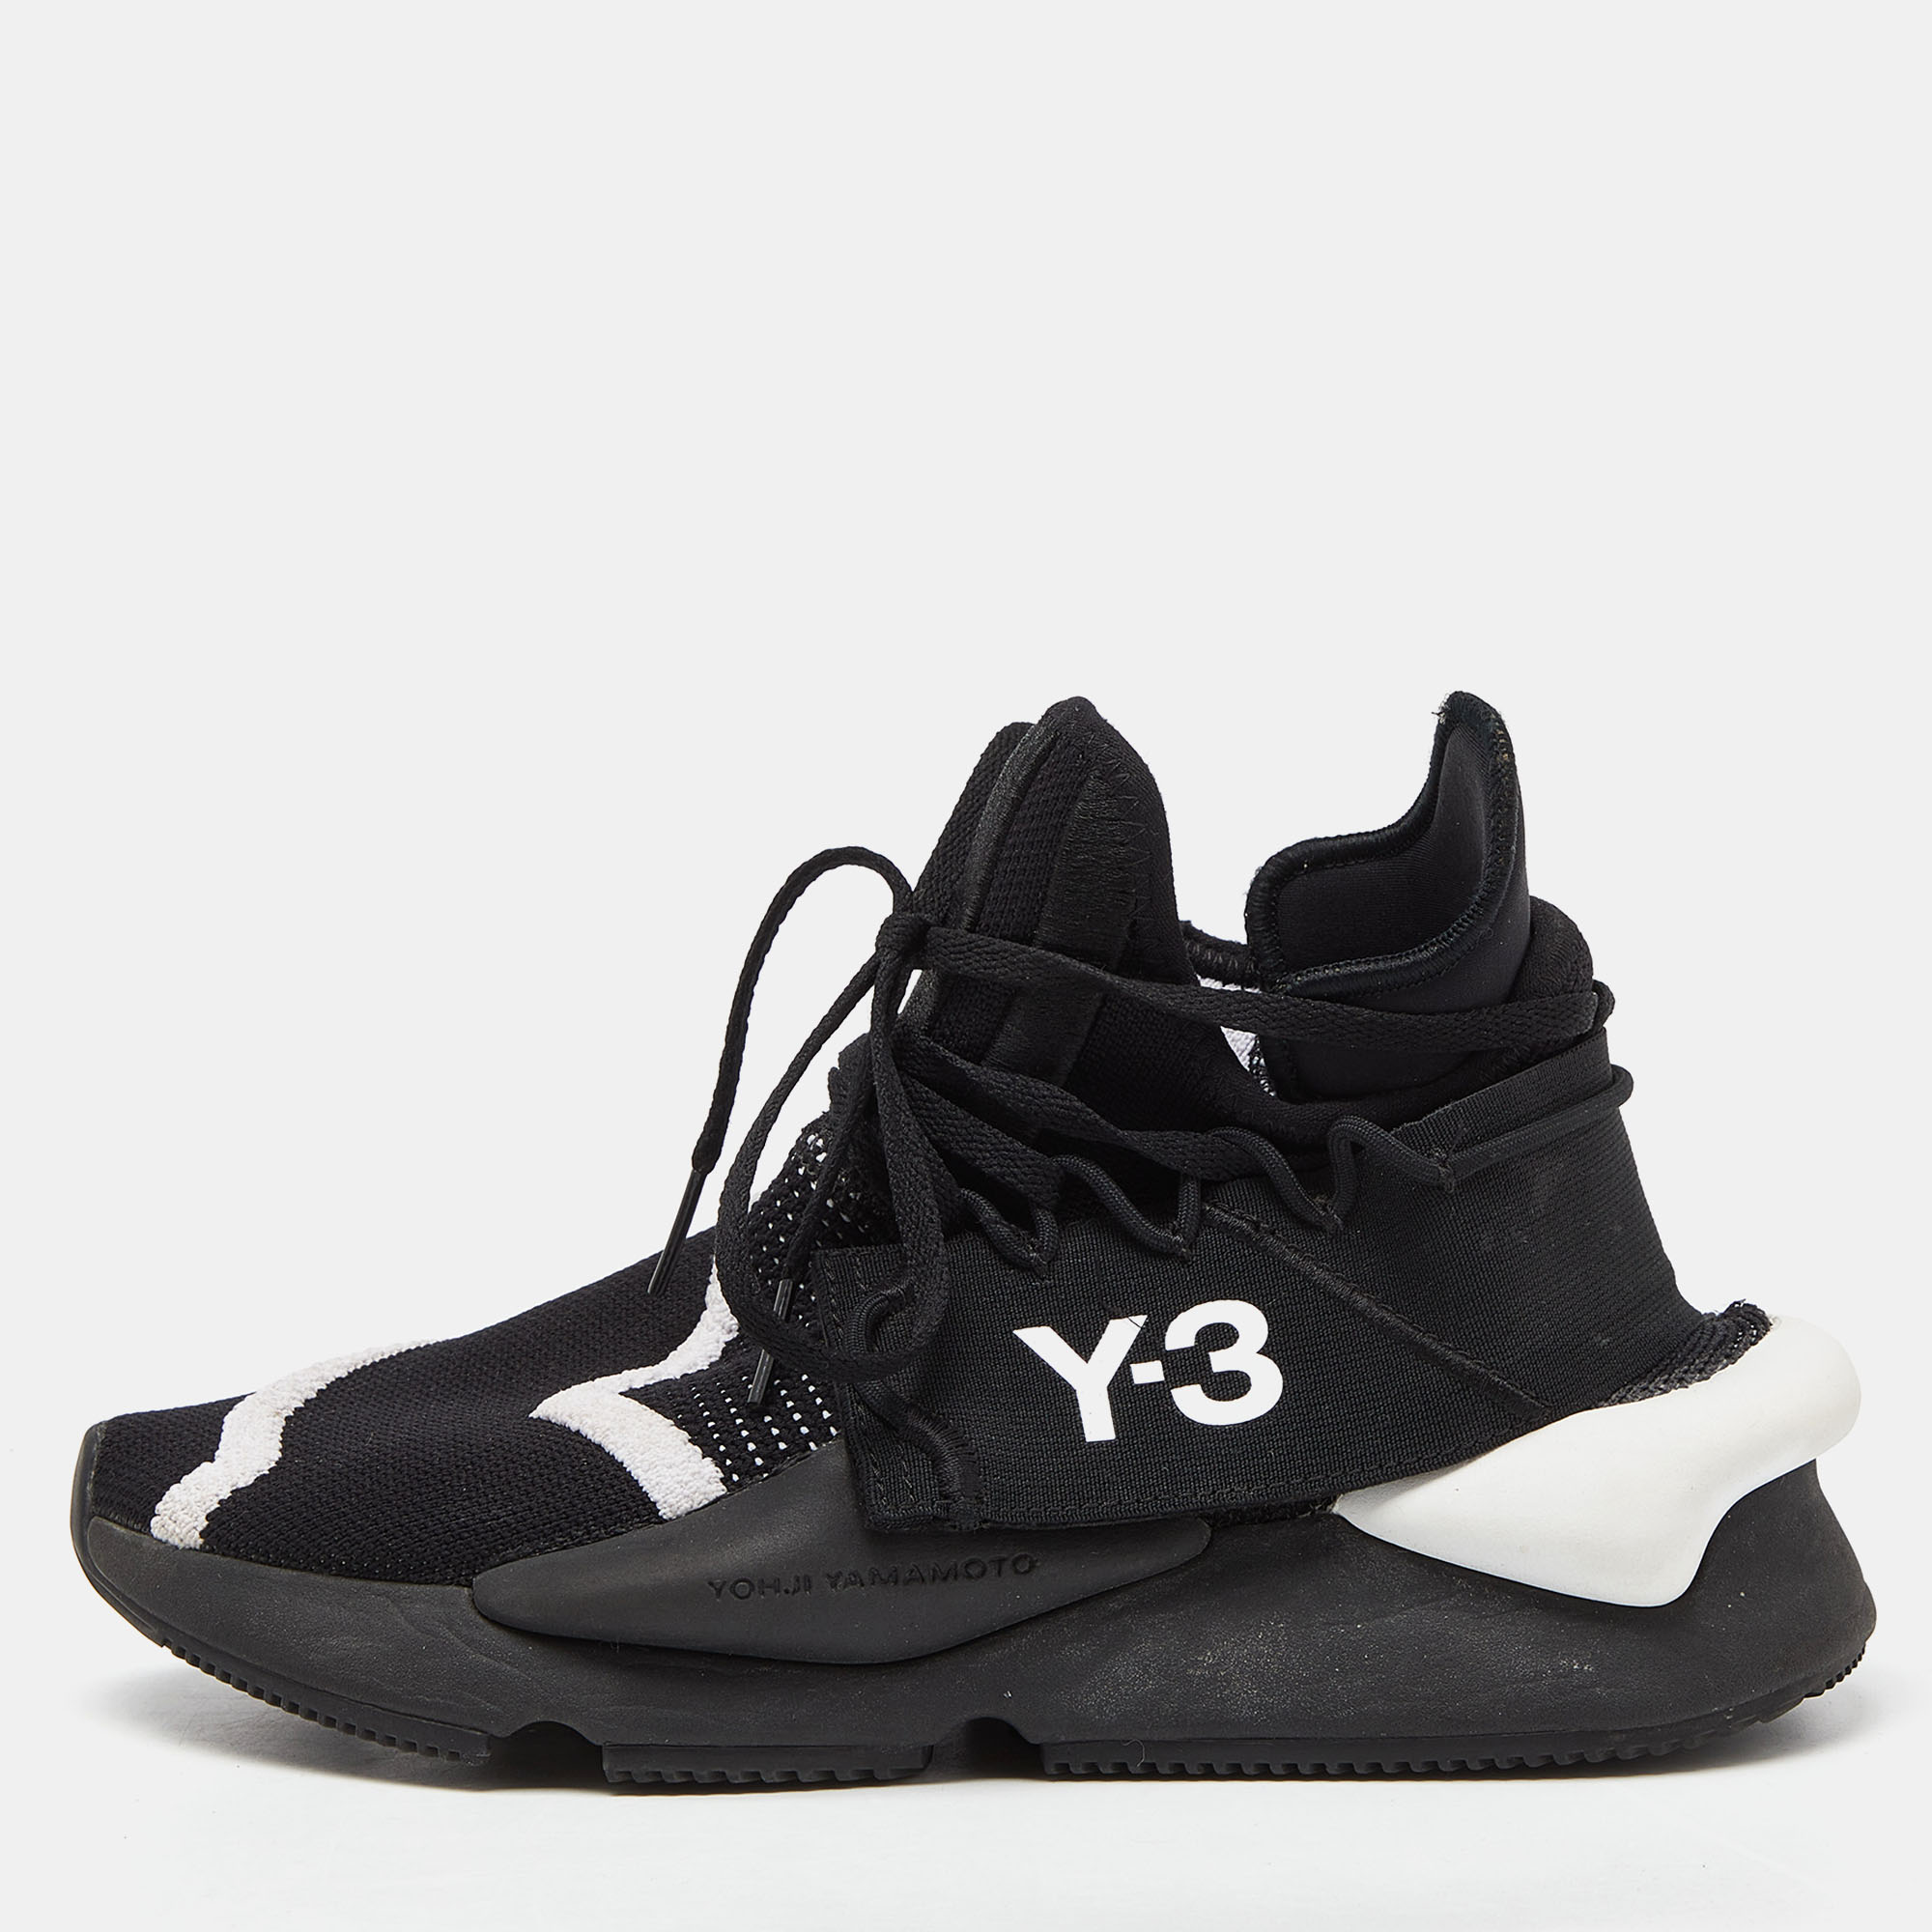 Pre-owned Y-3 Black Knit Fabric Cloth Low Trainers Sneakers Size 39.5